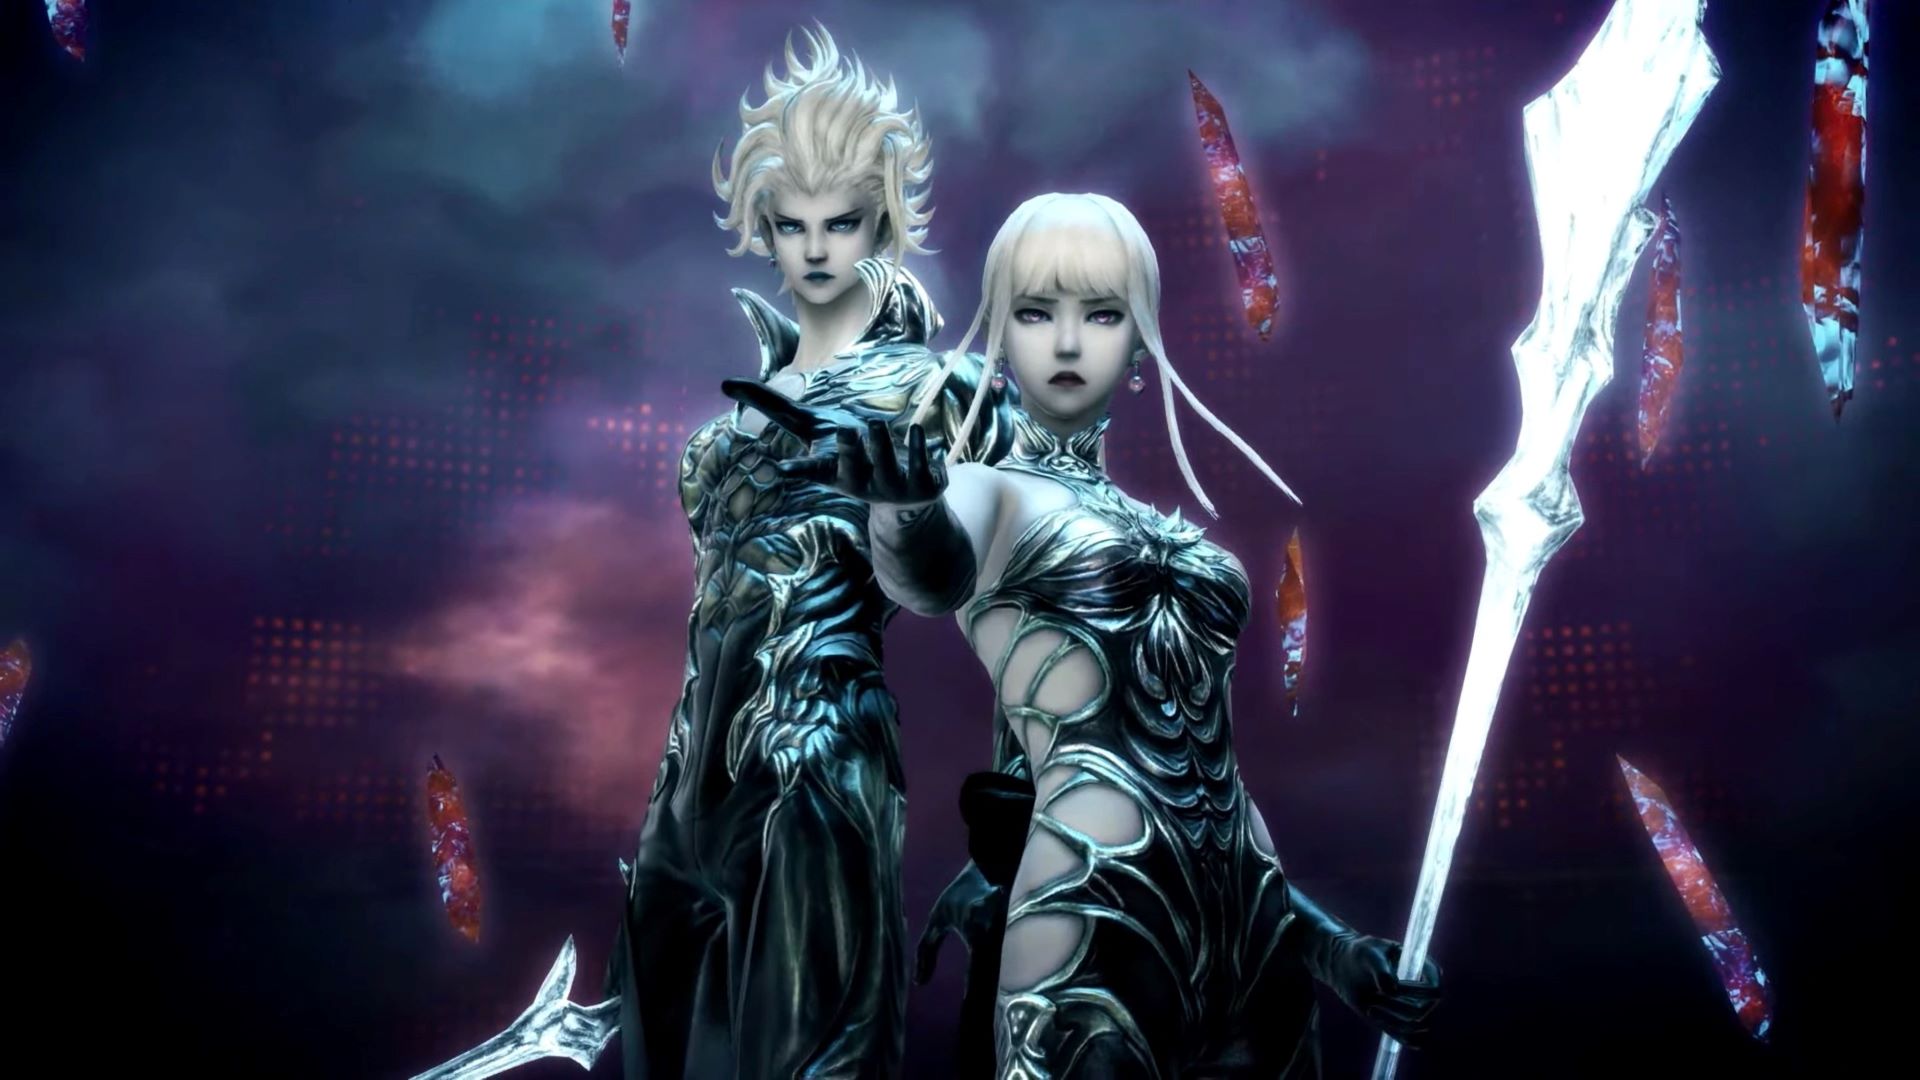 Meet the Final Fantasy 14 heroes making the MMO's…